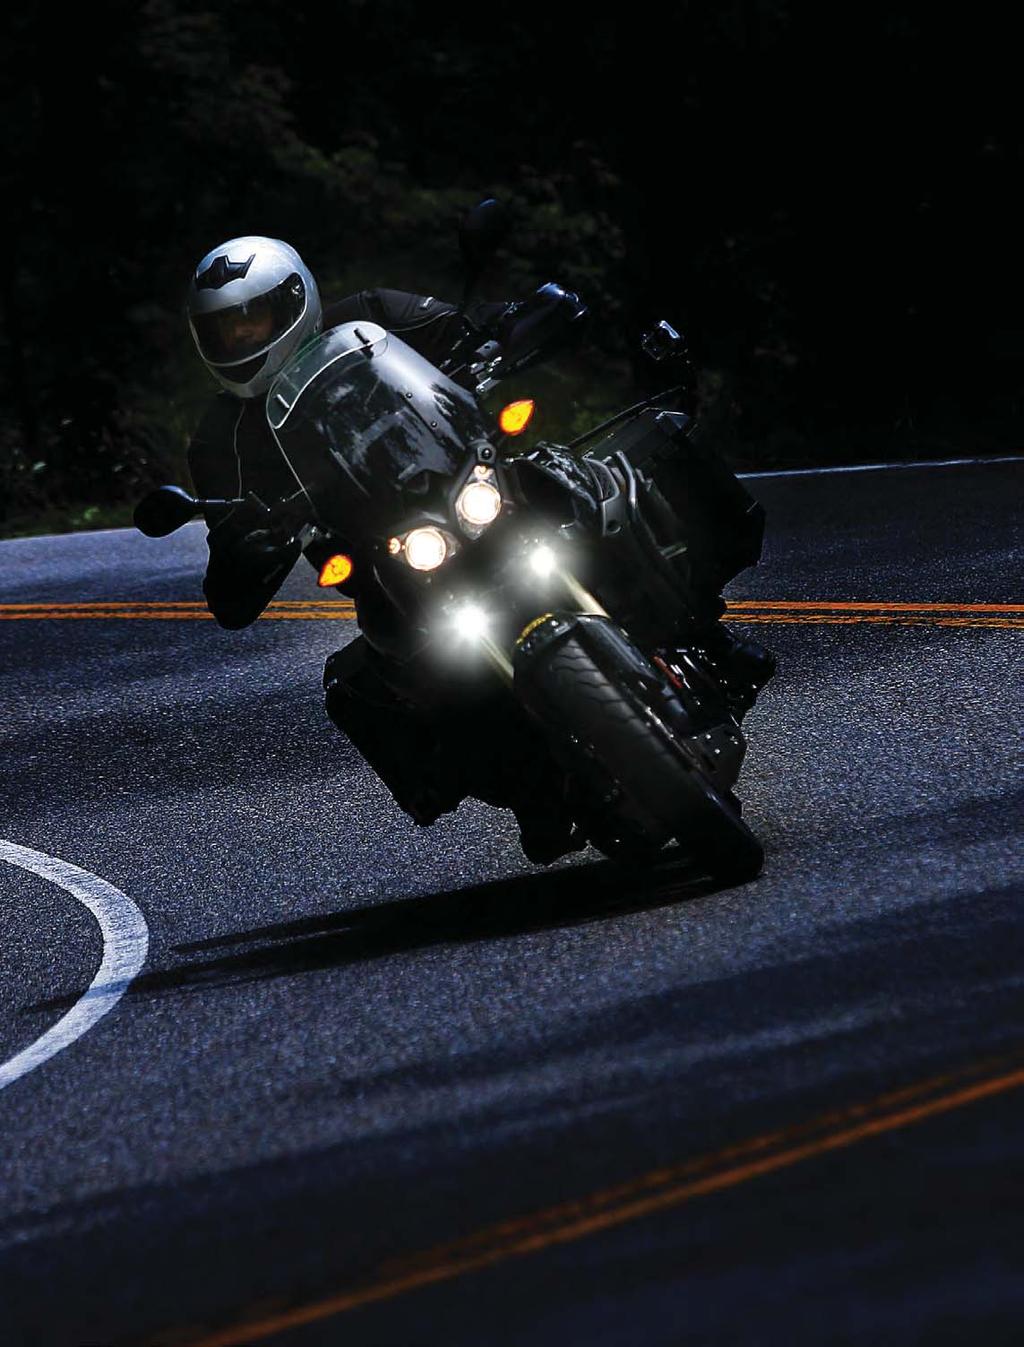 WHY DENALI? Our LED light kits are purpose-built for motorcycles, with compact pods delivering unmatched output for their size.